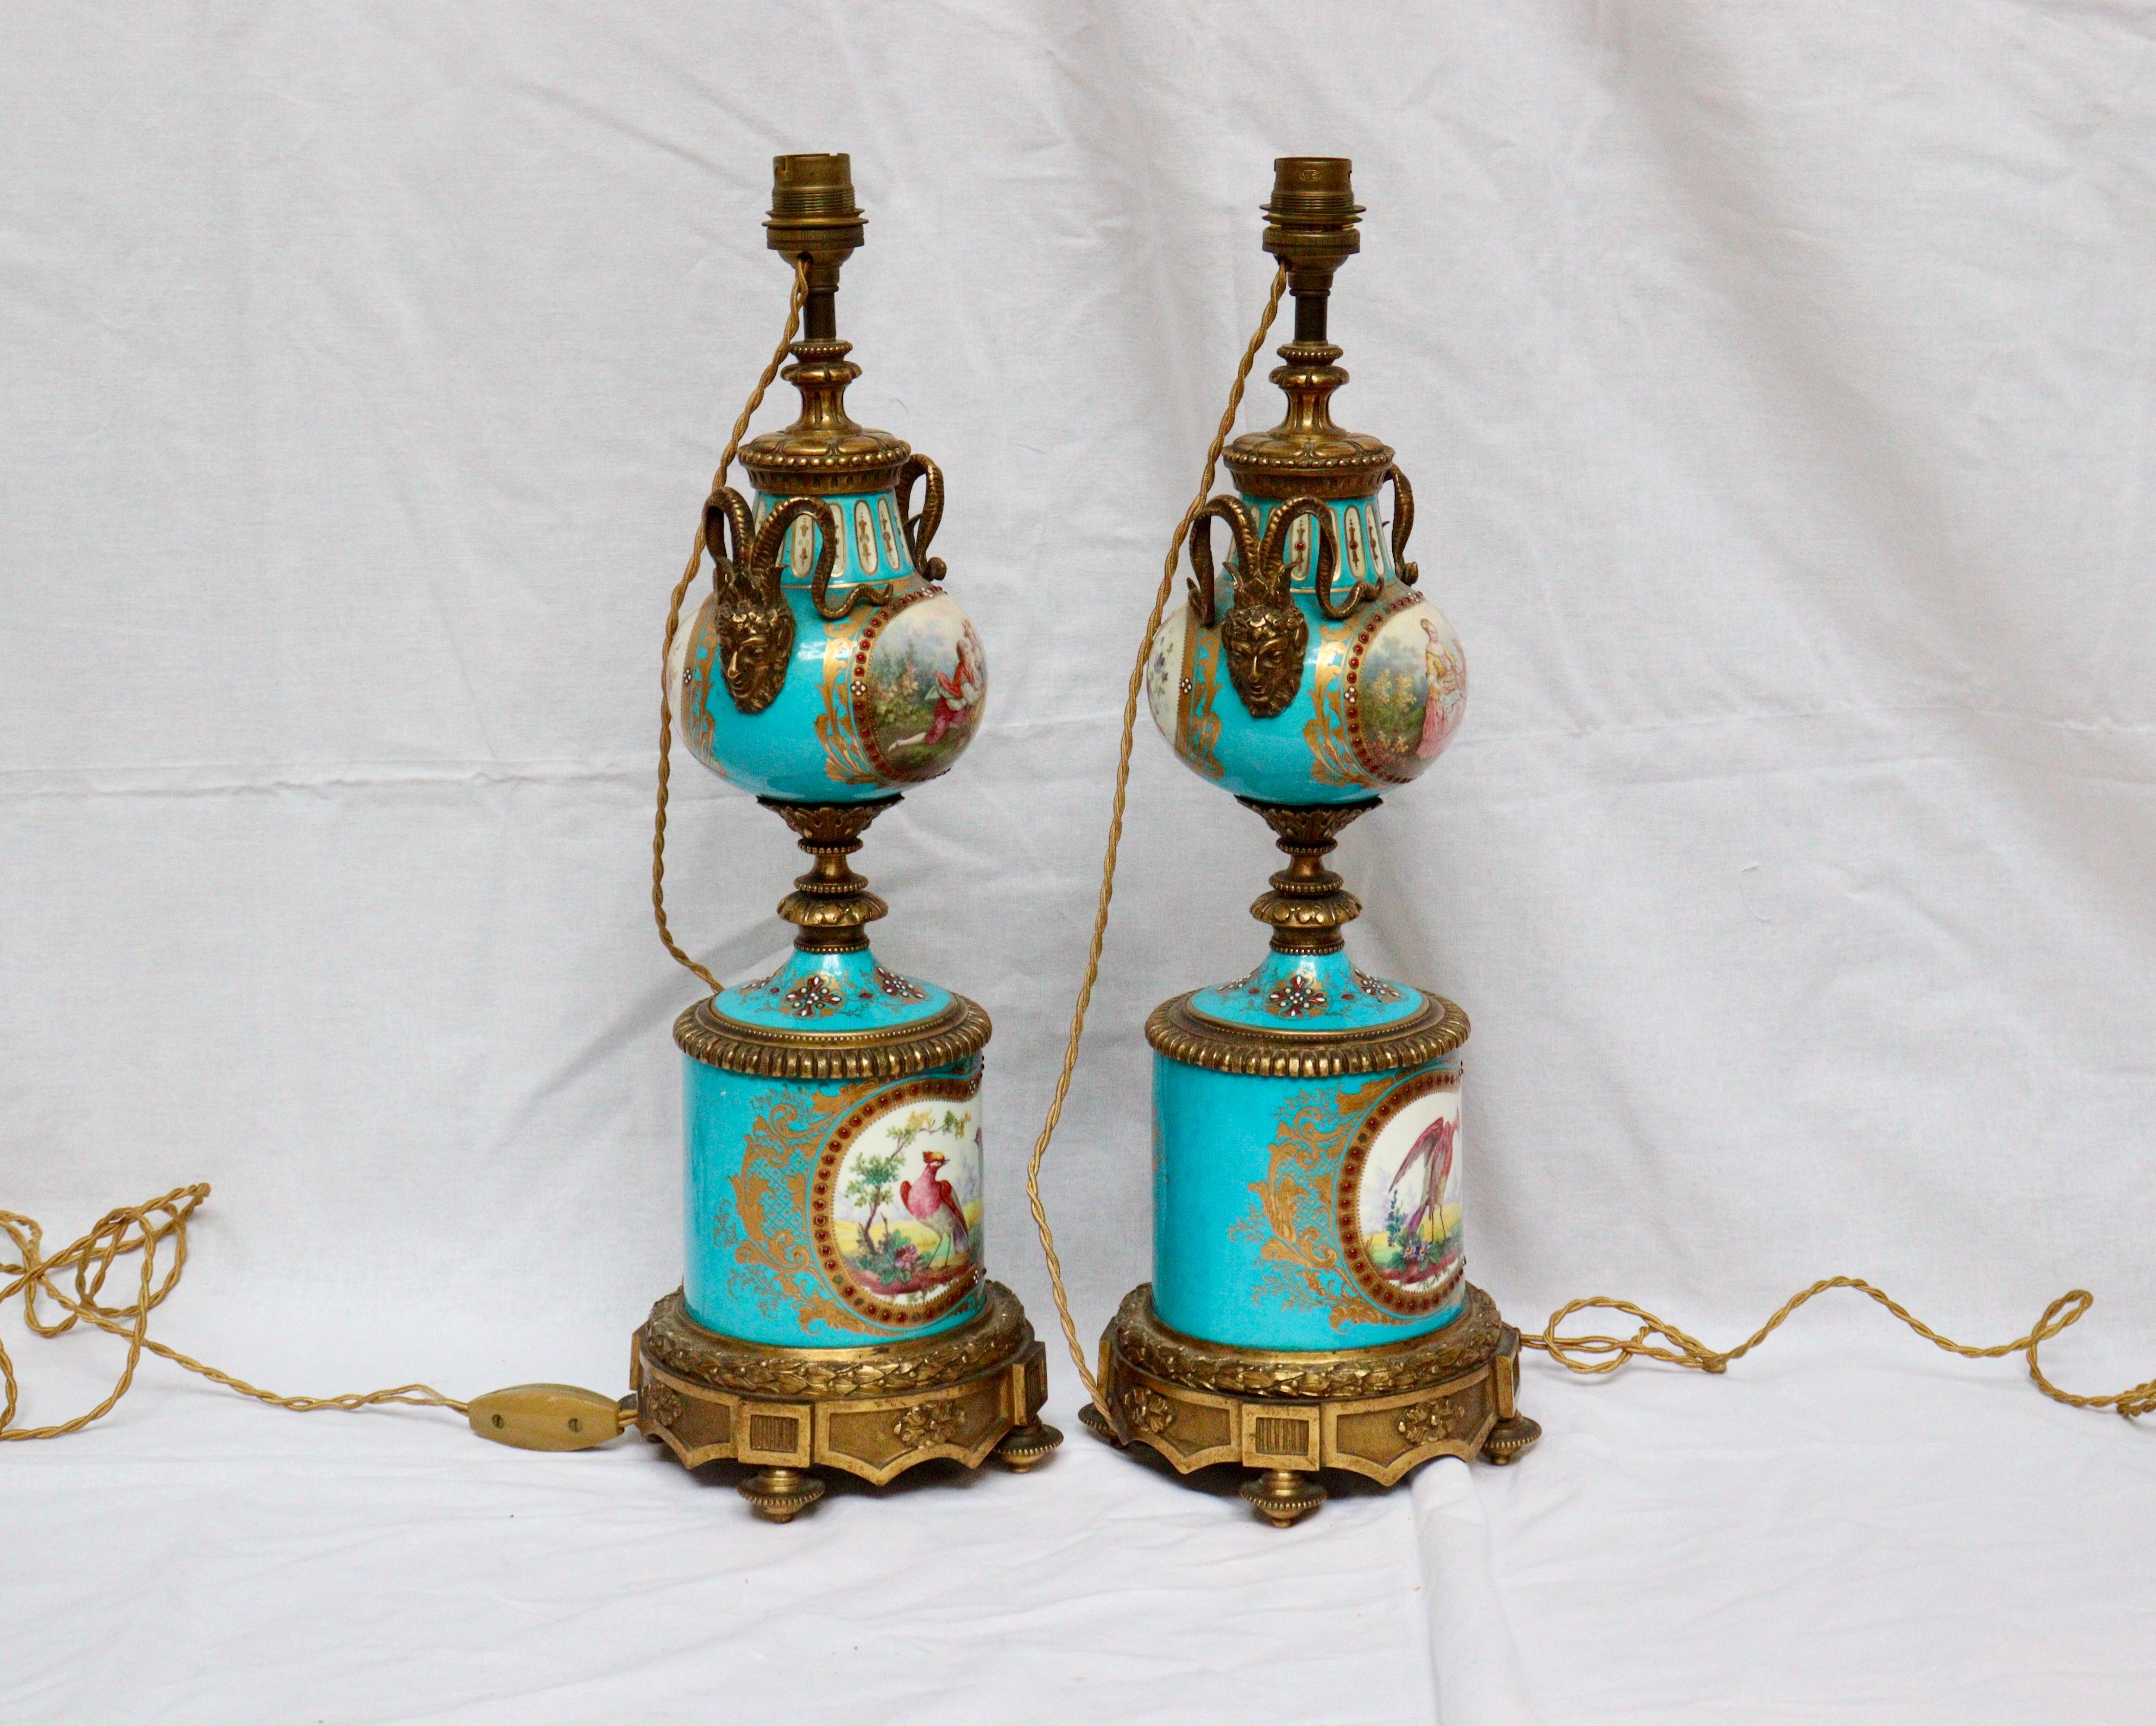 Hand-Painted 19th Century French Pair of Celeste Blue Ground Sèvres Porcelain Vases